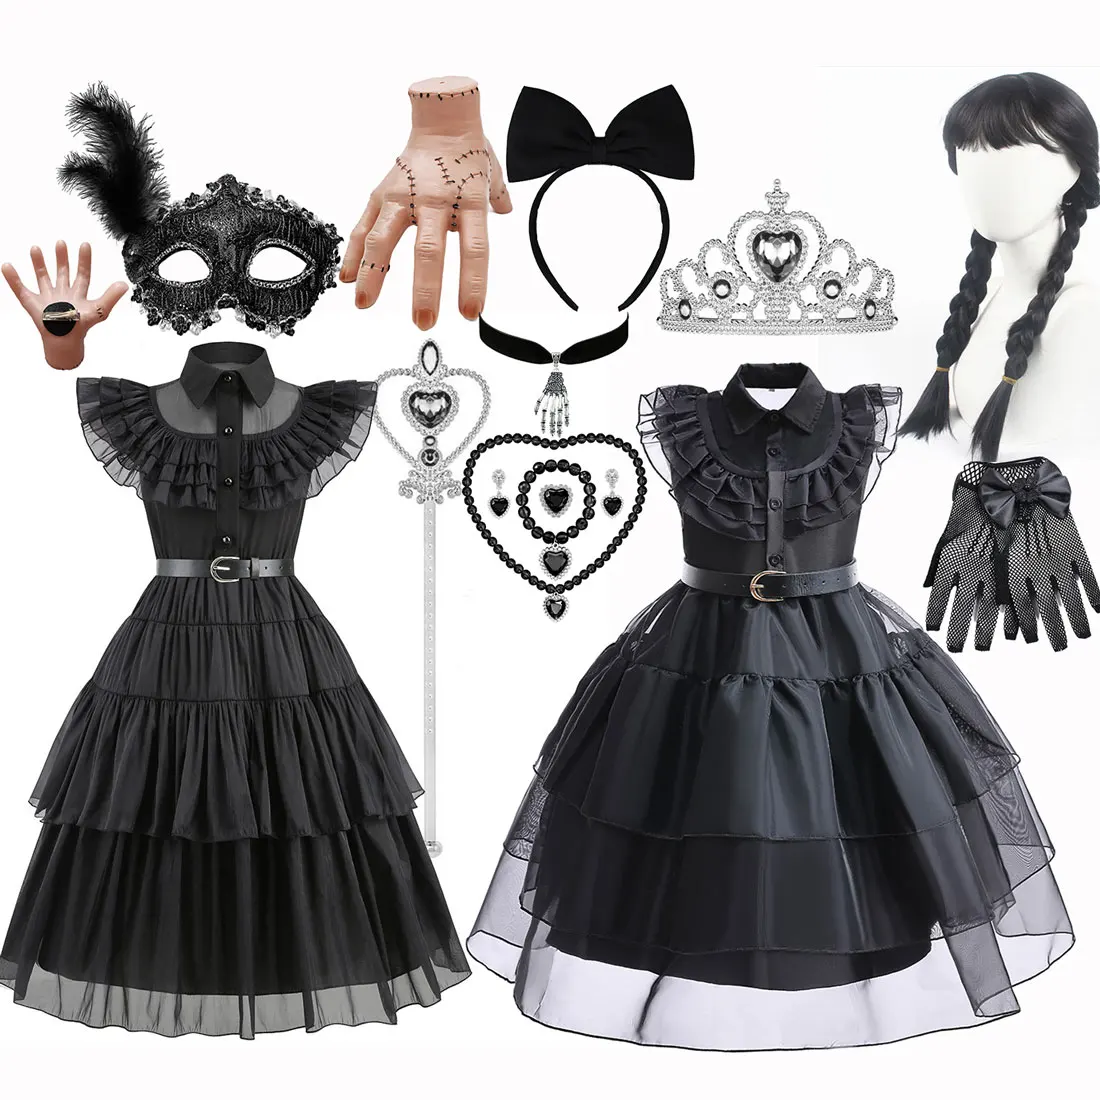 

Girls Wednesday Dress for Girl Addams Halloween Black Clothes Cosplay Costume Carnival Easter Party Costumes for 3-10 Years Hot